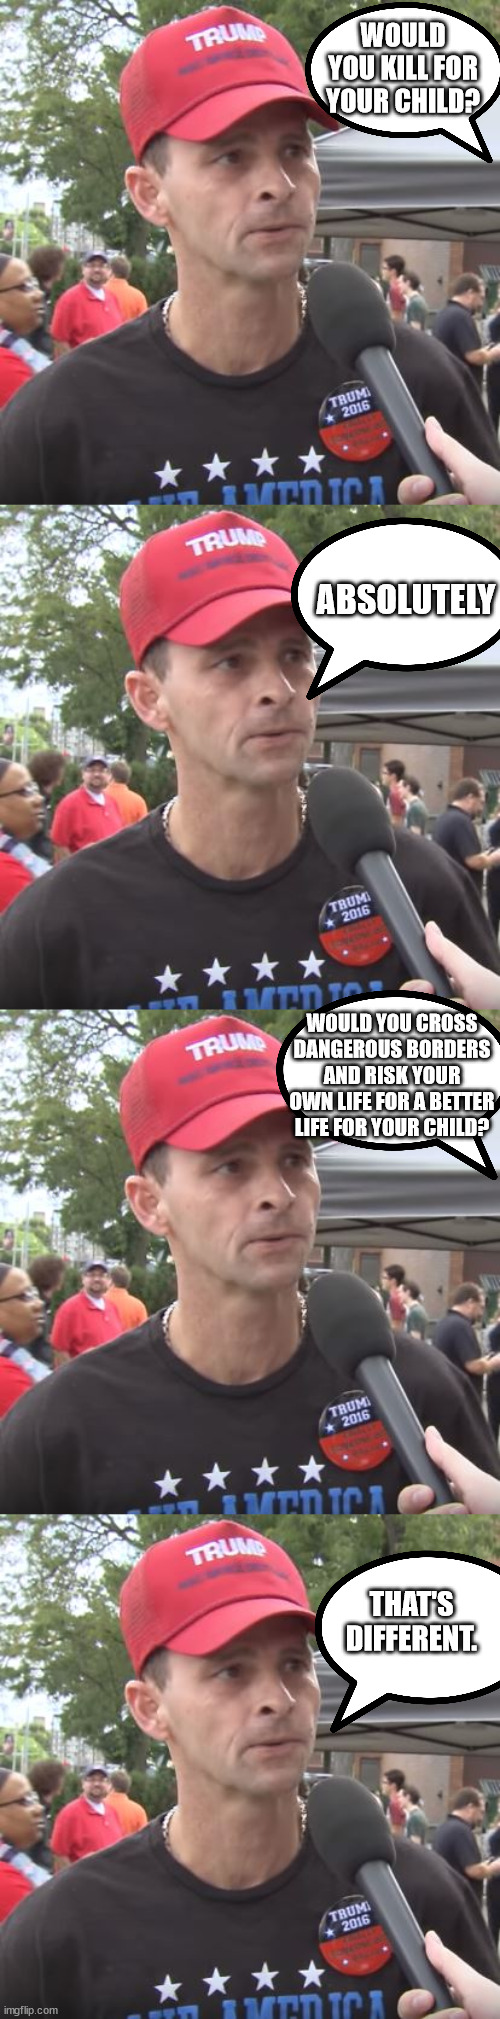 Somehow that's incomprehensible to them... | WOULD YOU KILL FOR YOUR CHILD? ABSOLUTELY; WOULD YOU CROSS DANGEROUS BORDERS AND RISK YOUR OWN LIFE FOR A BETTER LIFE FOR YOUR CHILD? THAT'S DIFFERENT. | image tagged in trump supporter | made w/ Imgflip meme maker